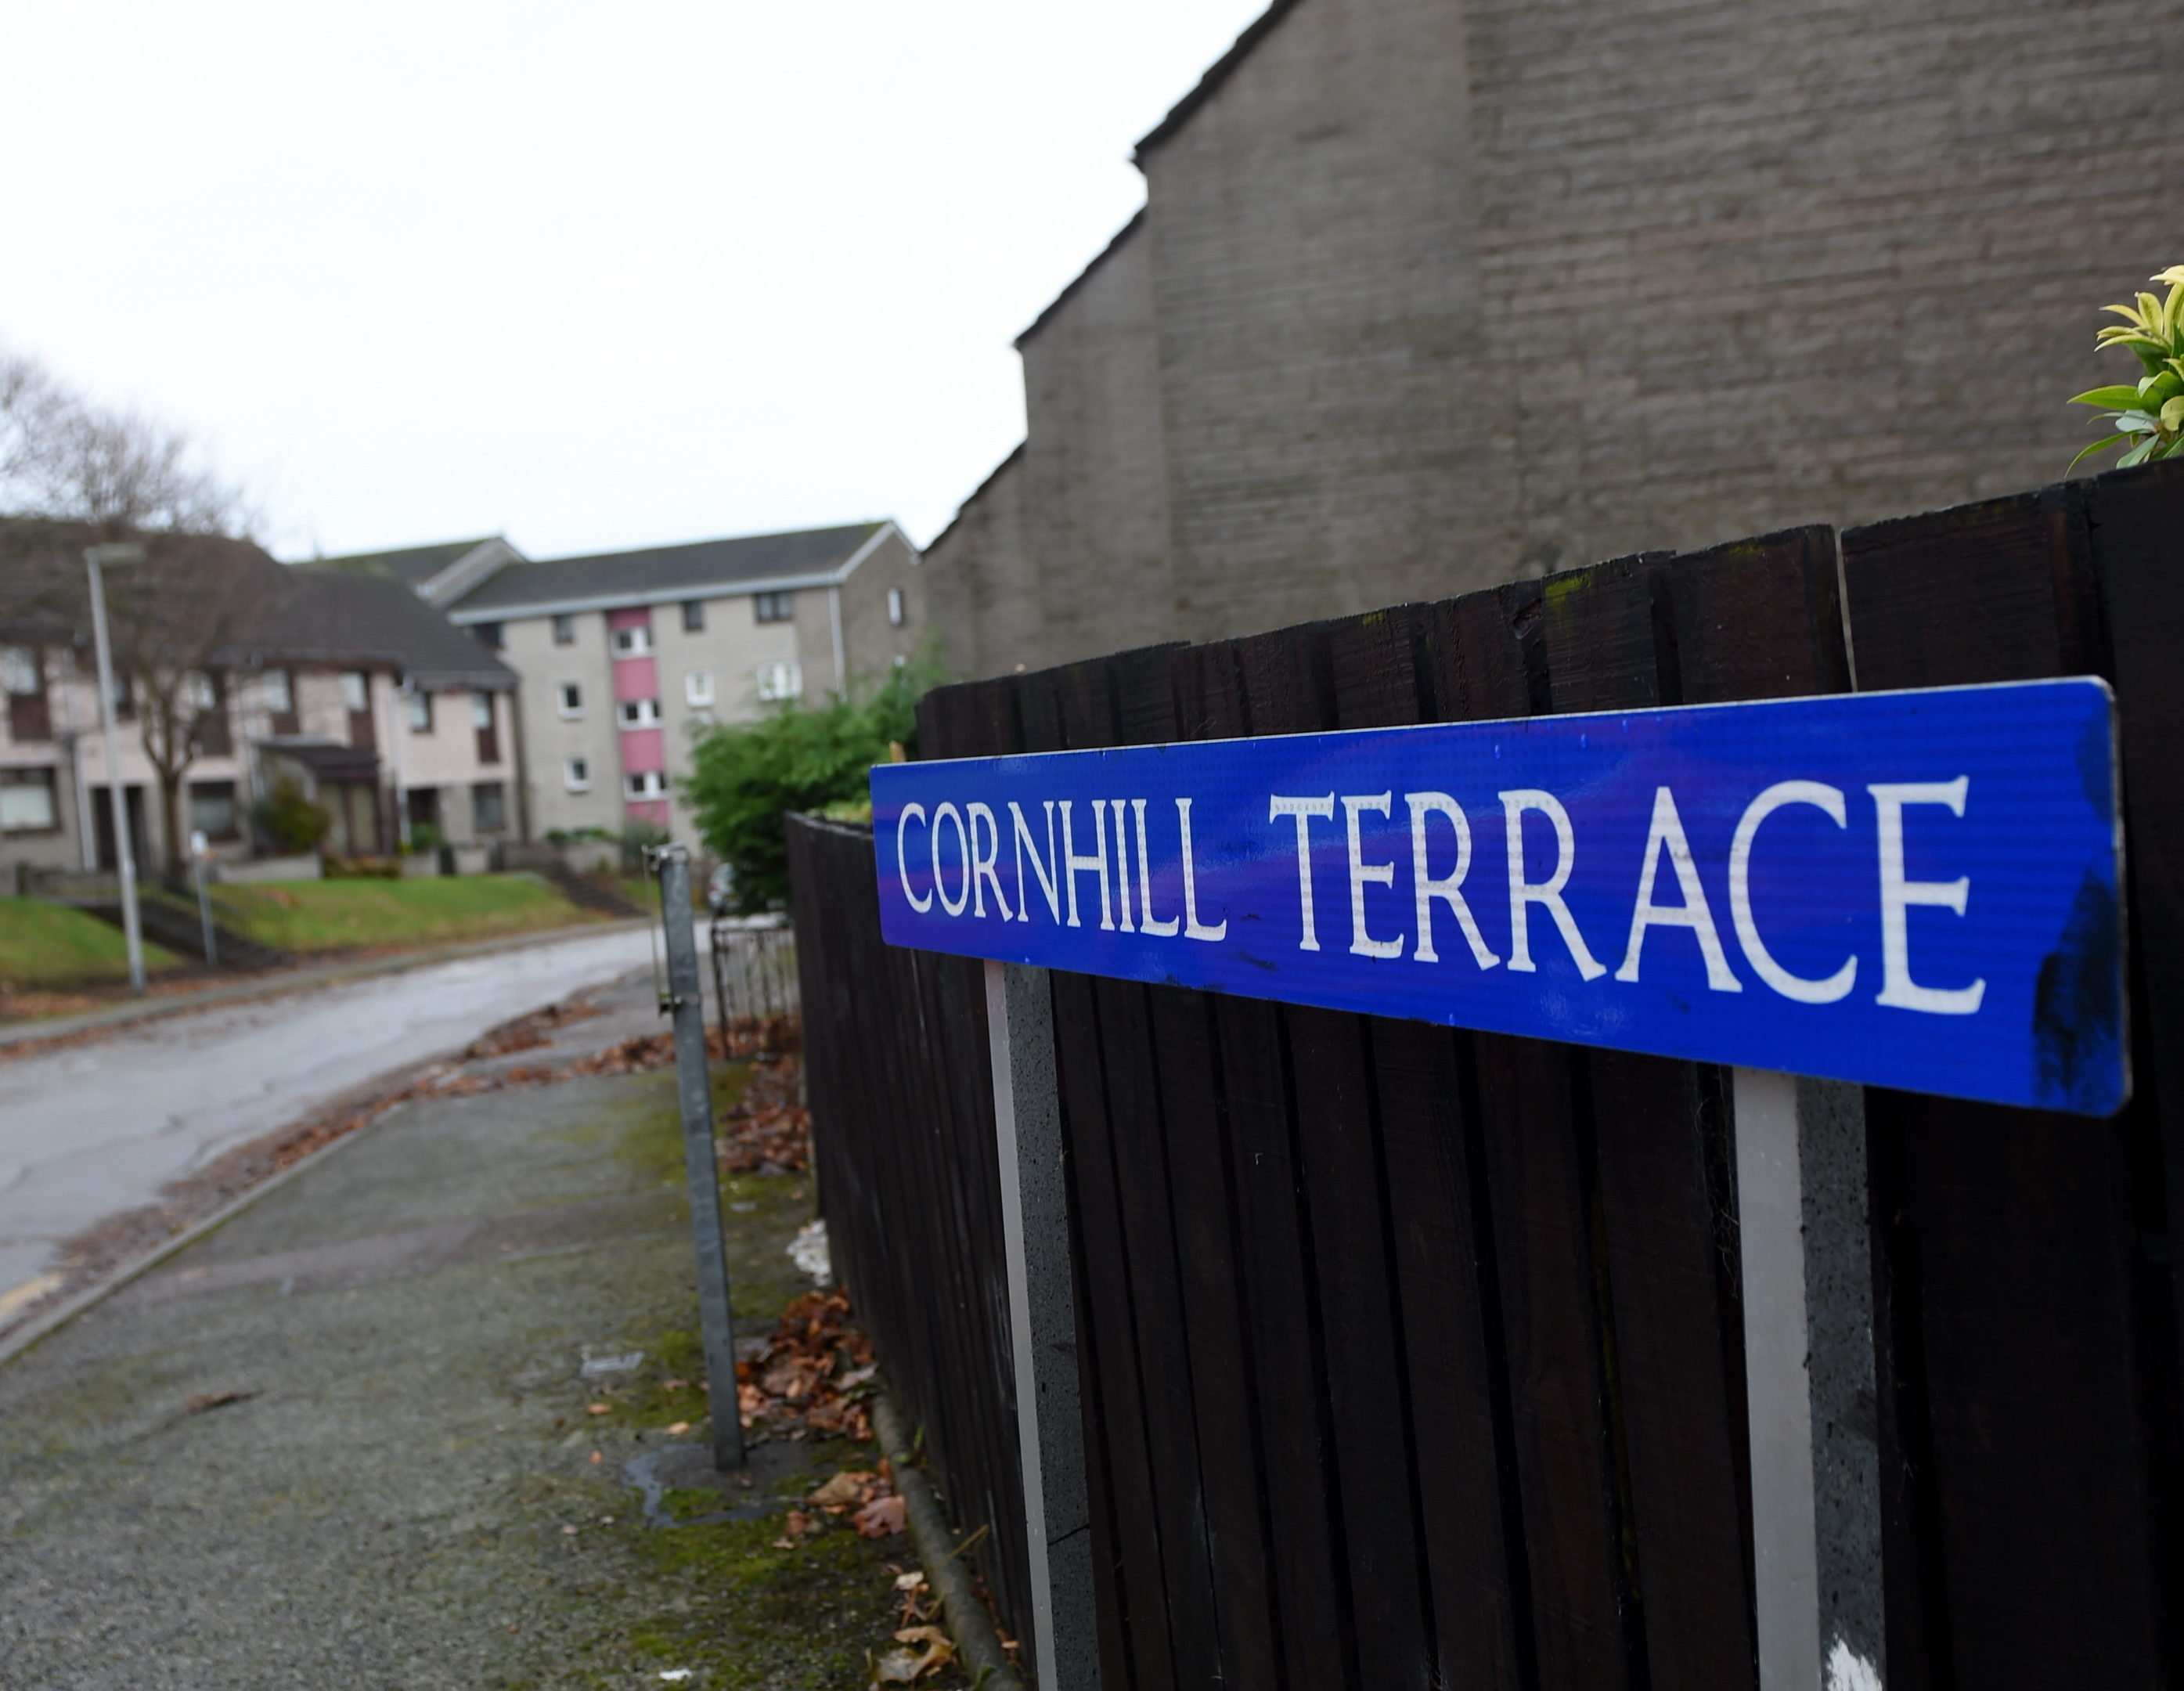 The offences are alleged to have taken place on Cornhill Terrace.